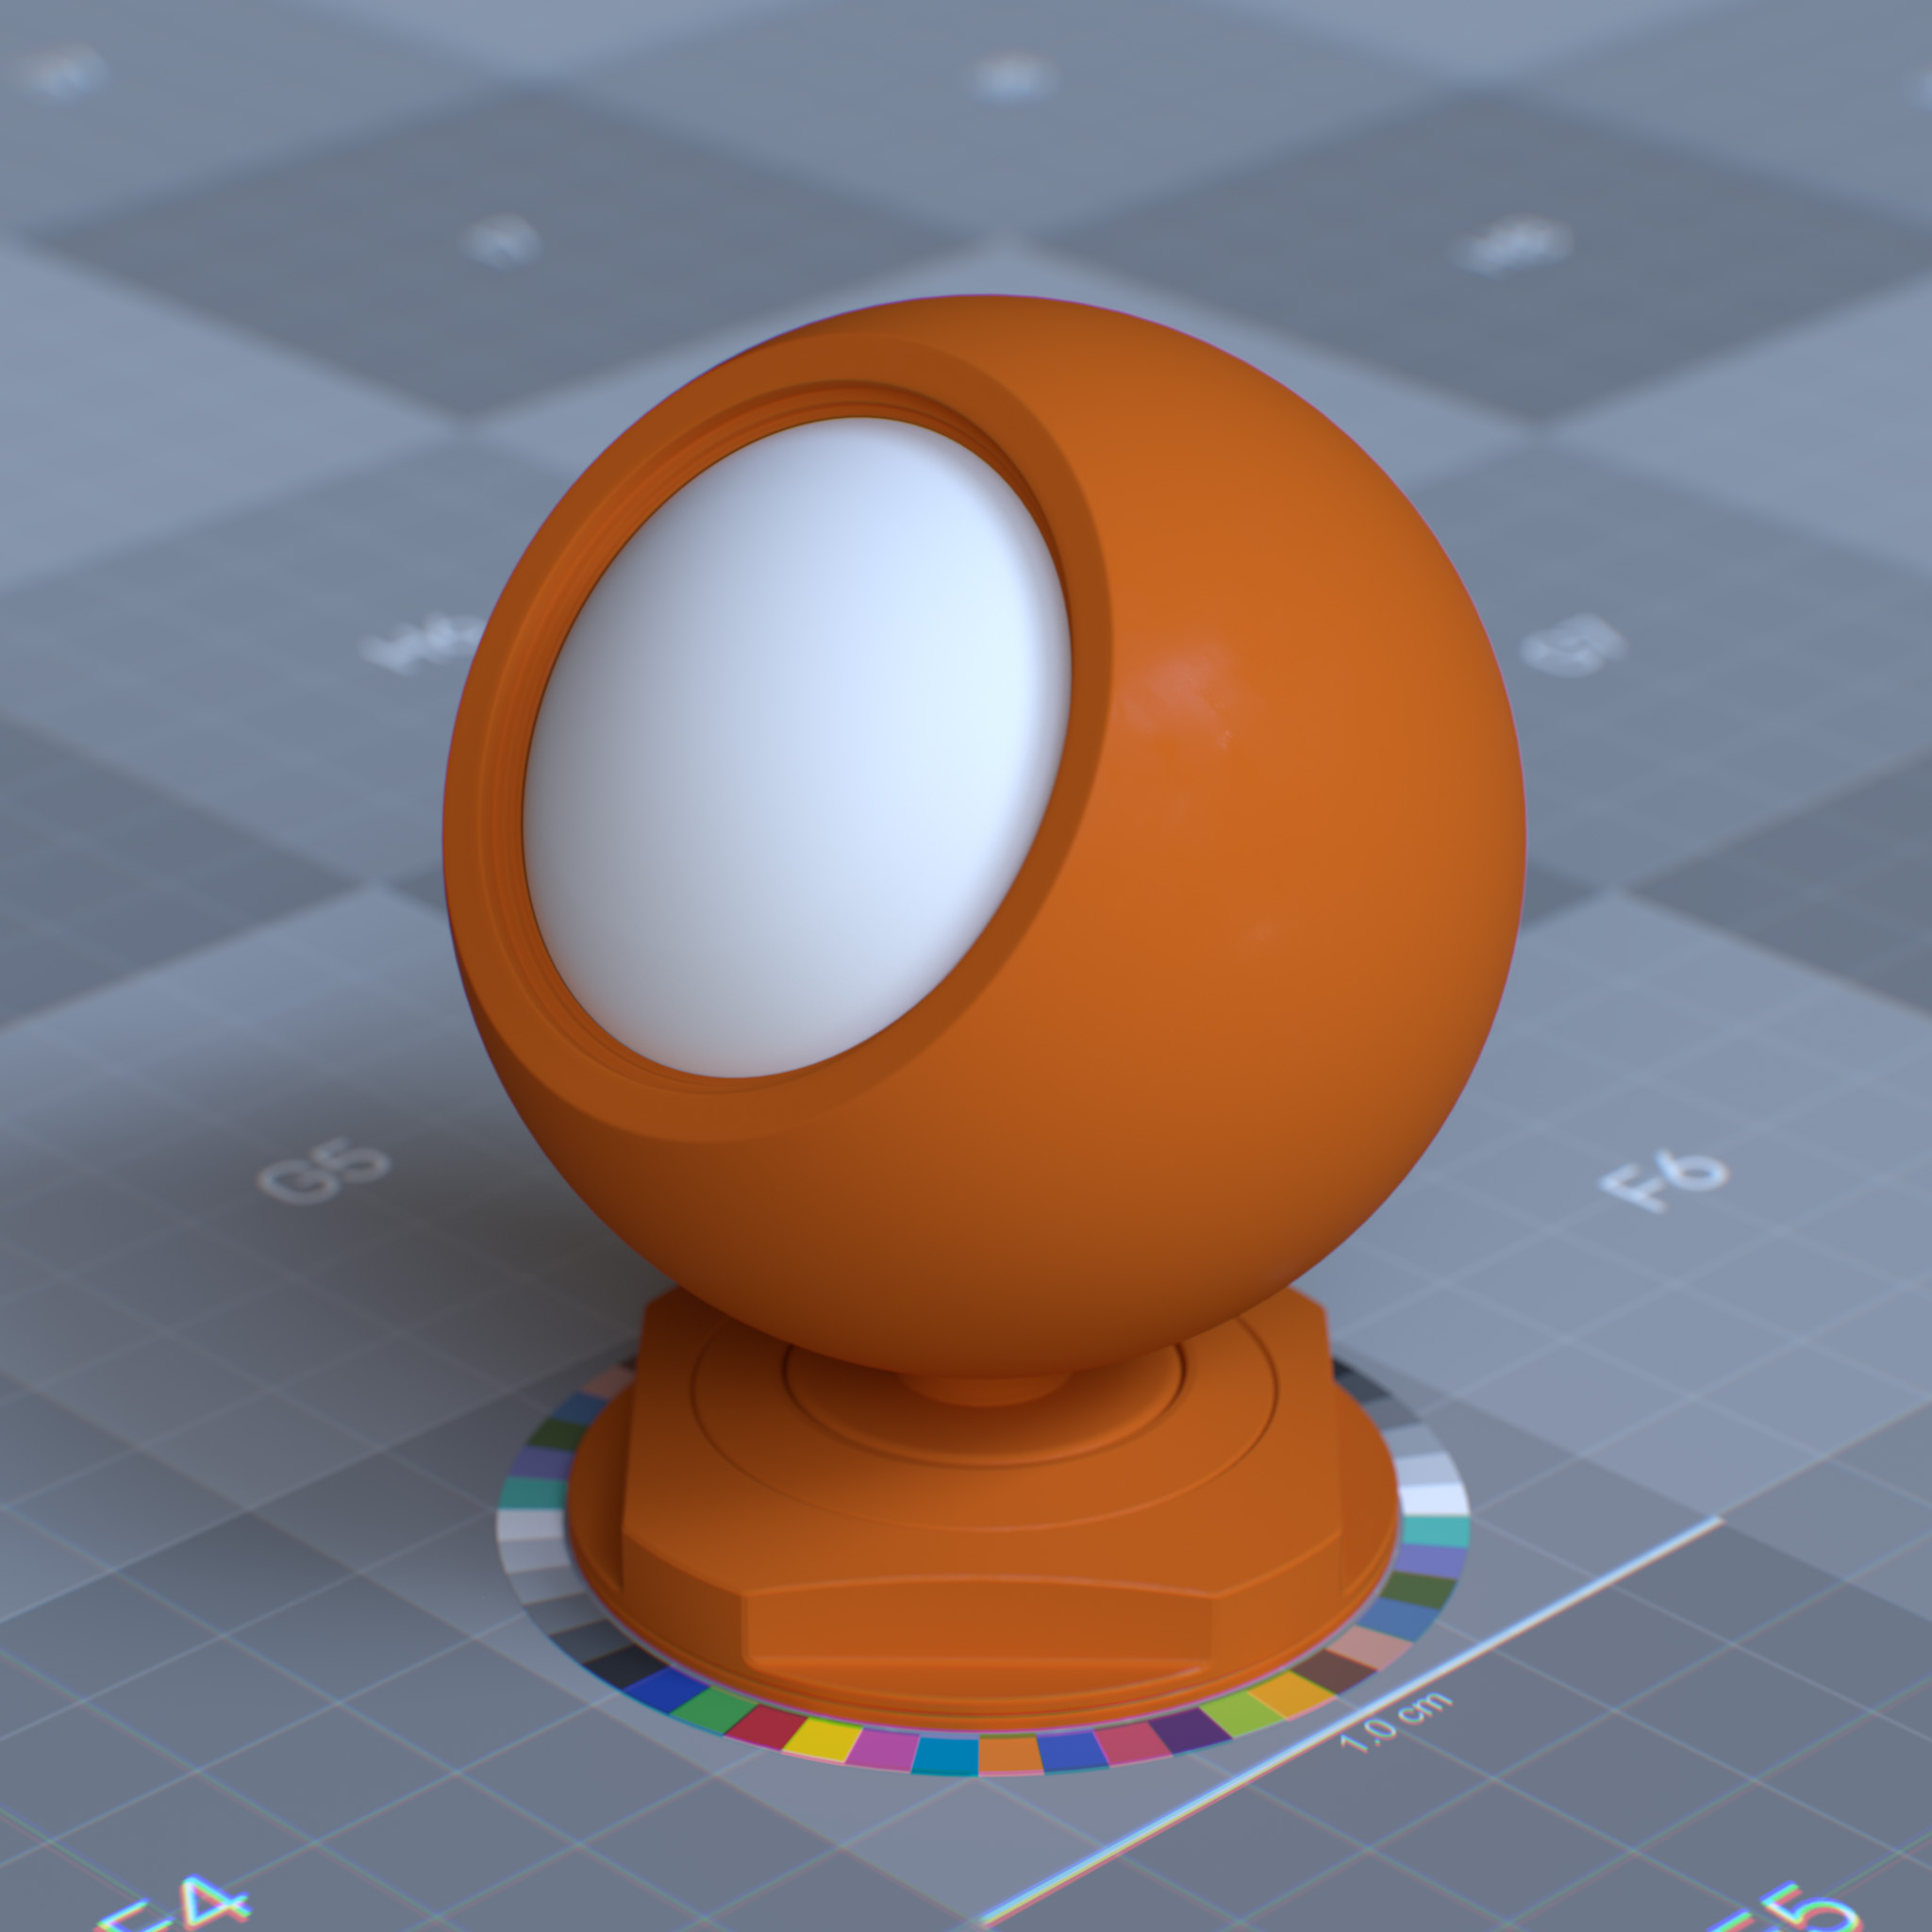 rtx_material_omnisurfacebase_diffuse_reflection_roughness_0p0